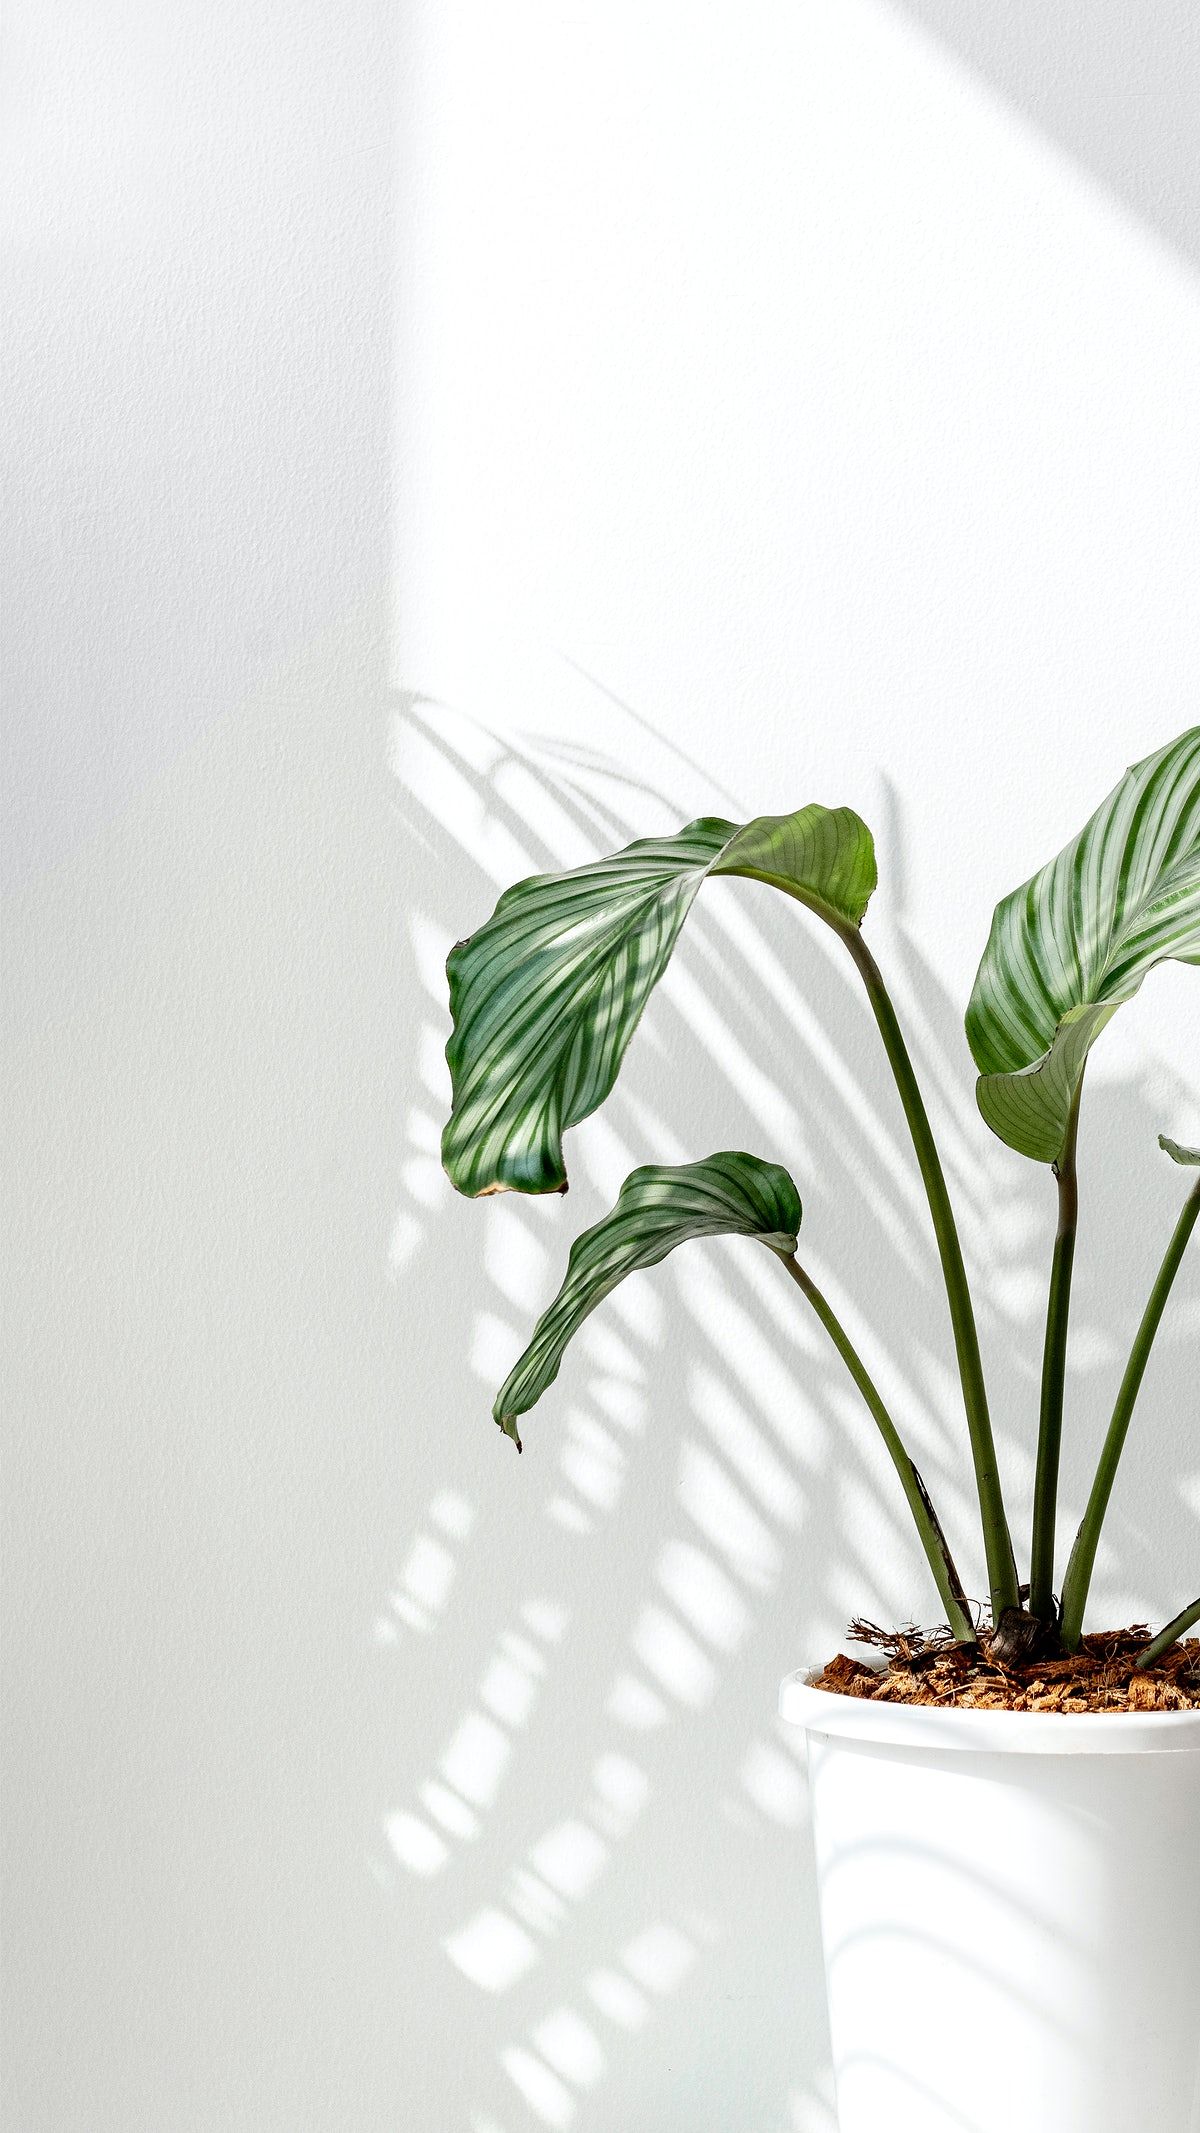 Download premium image of Calathea Orbifolia by a white wall by Jira about calathea orbifolia, shadow window, table, plant shadow wall, and window shadow photo. Simple iphone wallpaper, Simple wallpaper